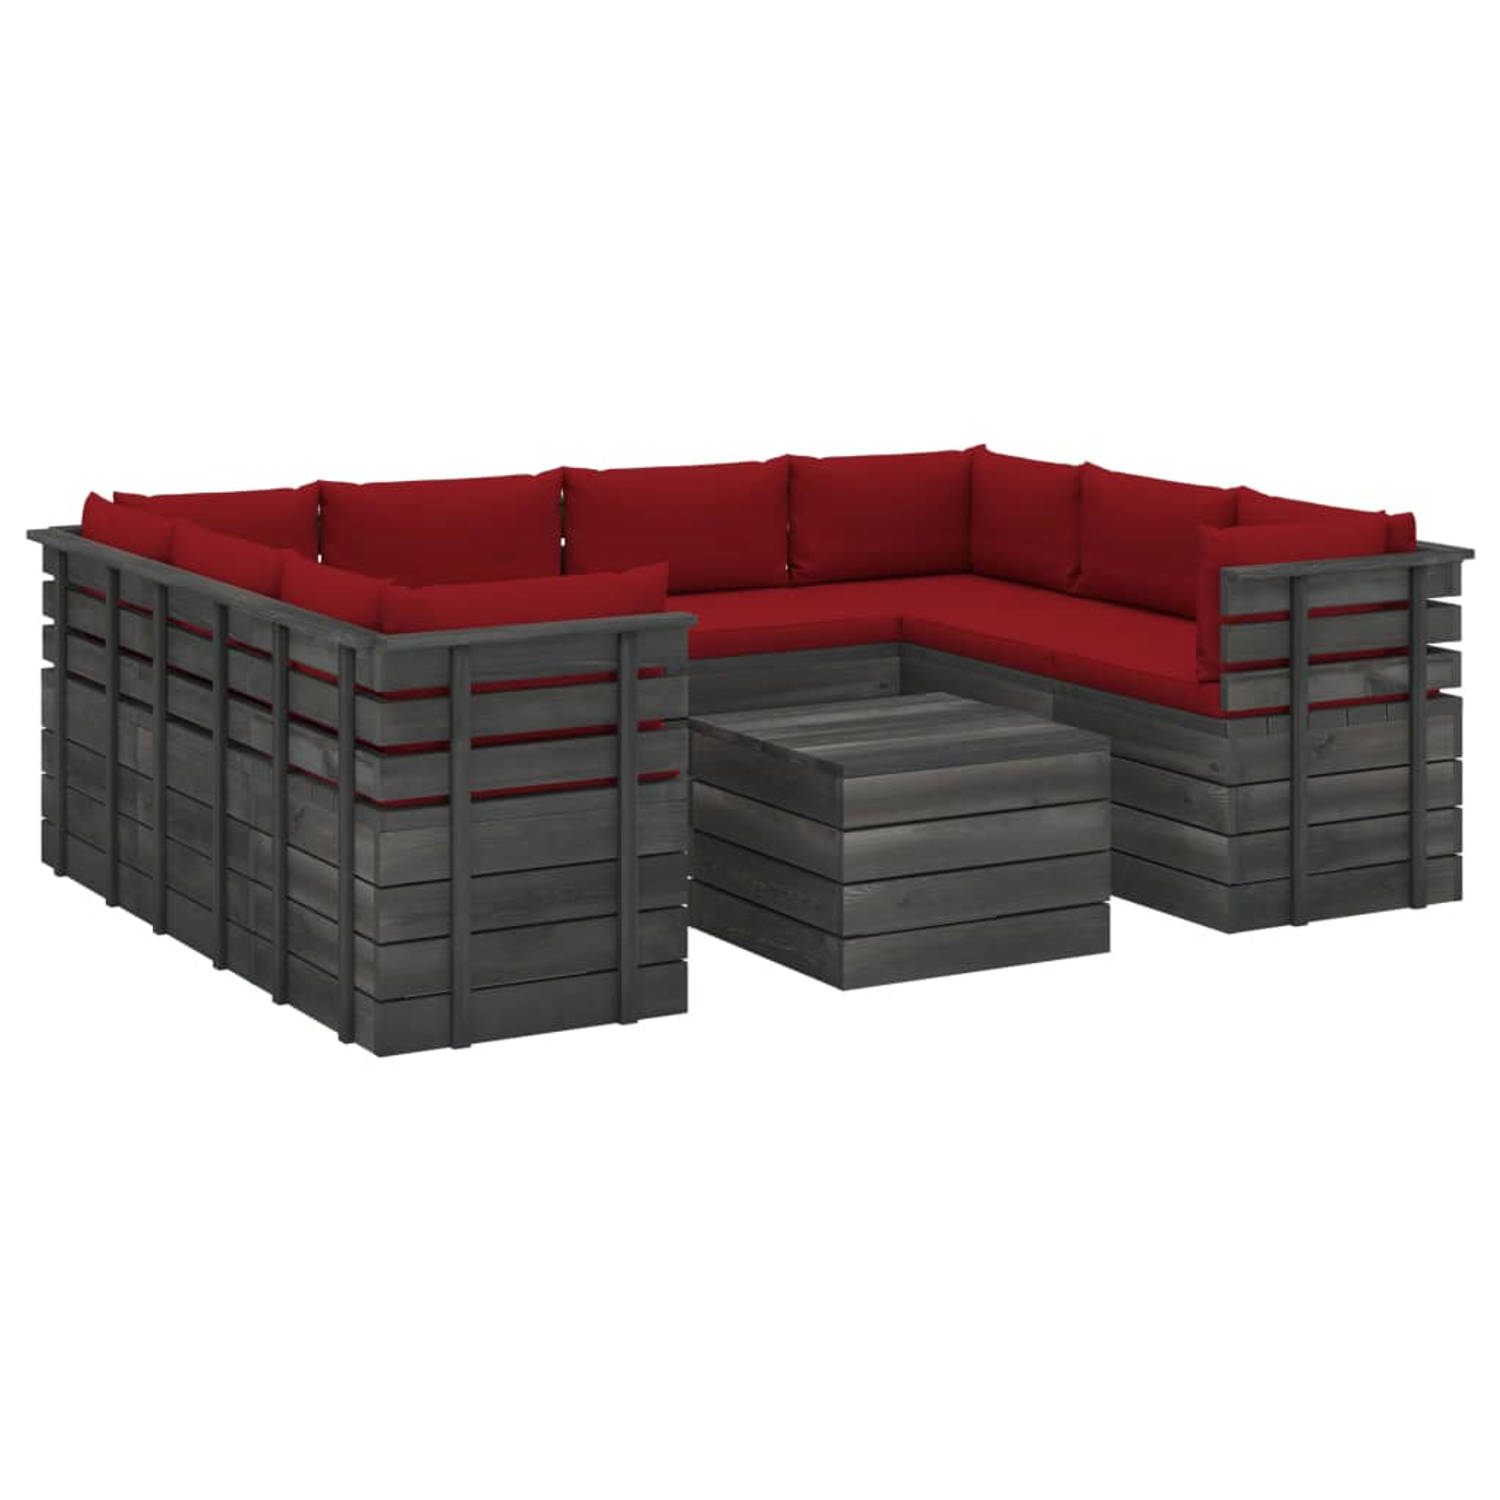 The Living Store Tuinset Pallet - Houten Loungeset - Massief Grenenhout - 60x65x71.5cm - Wijnrood